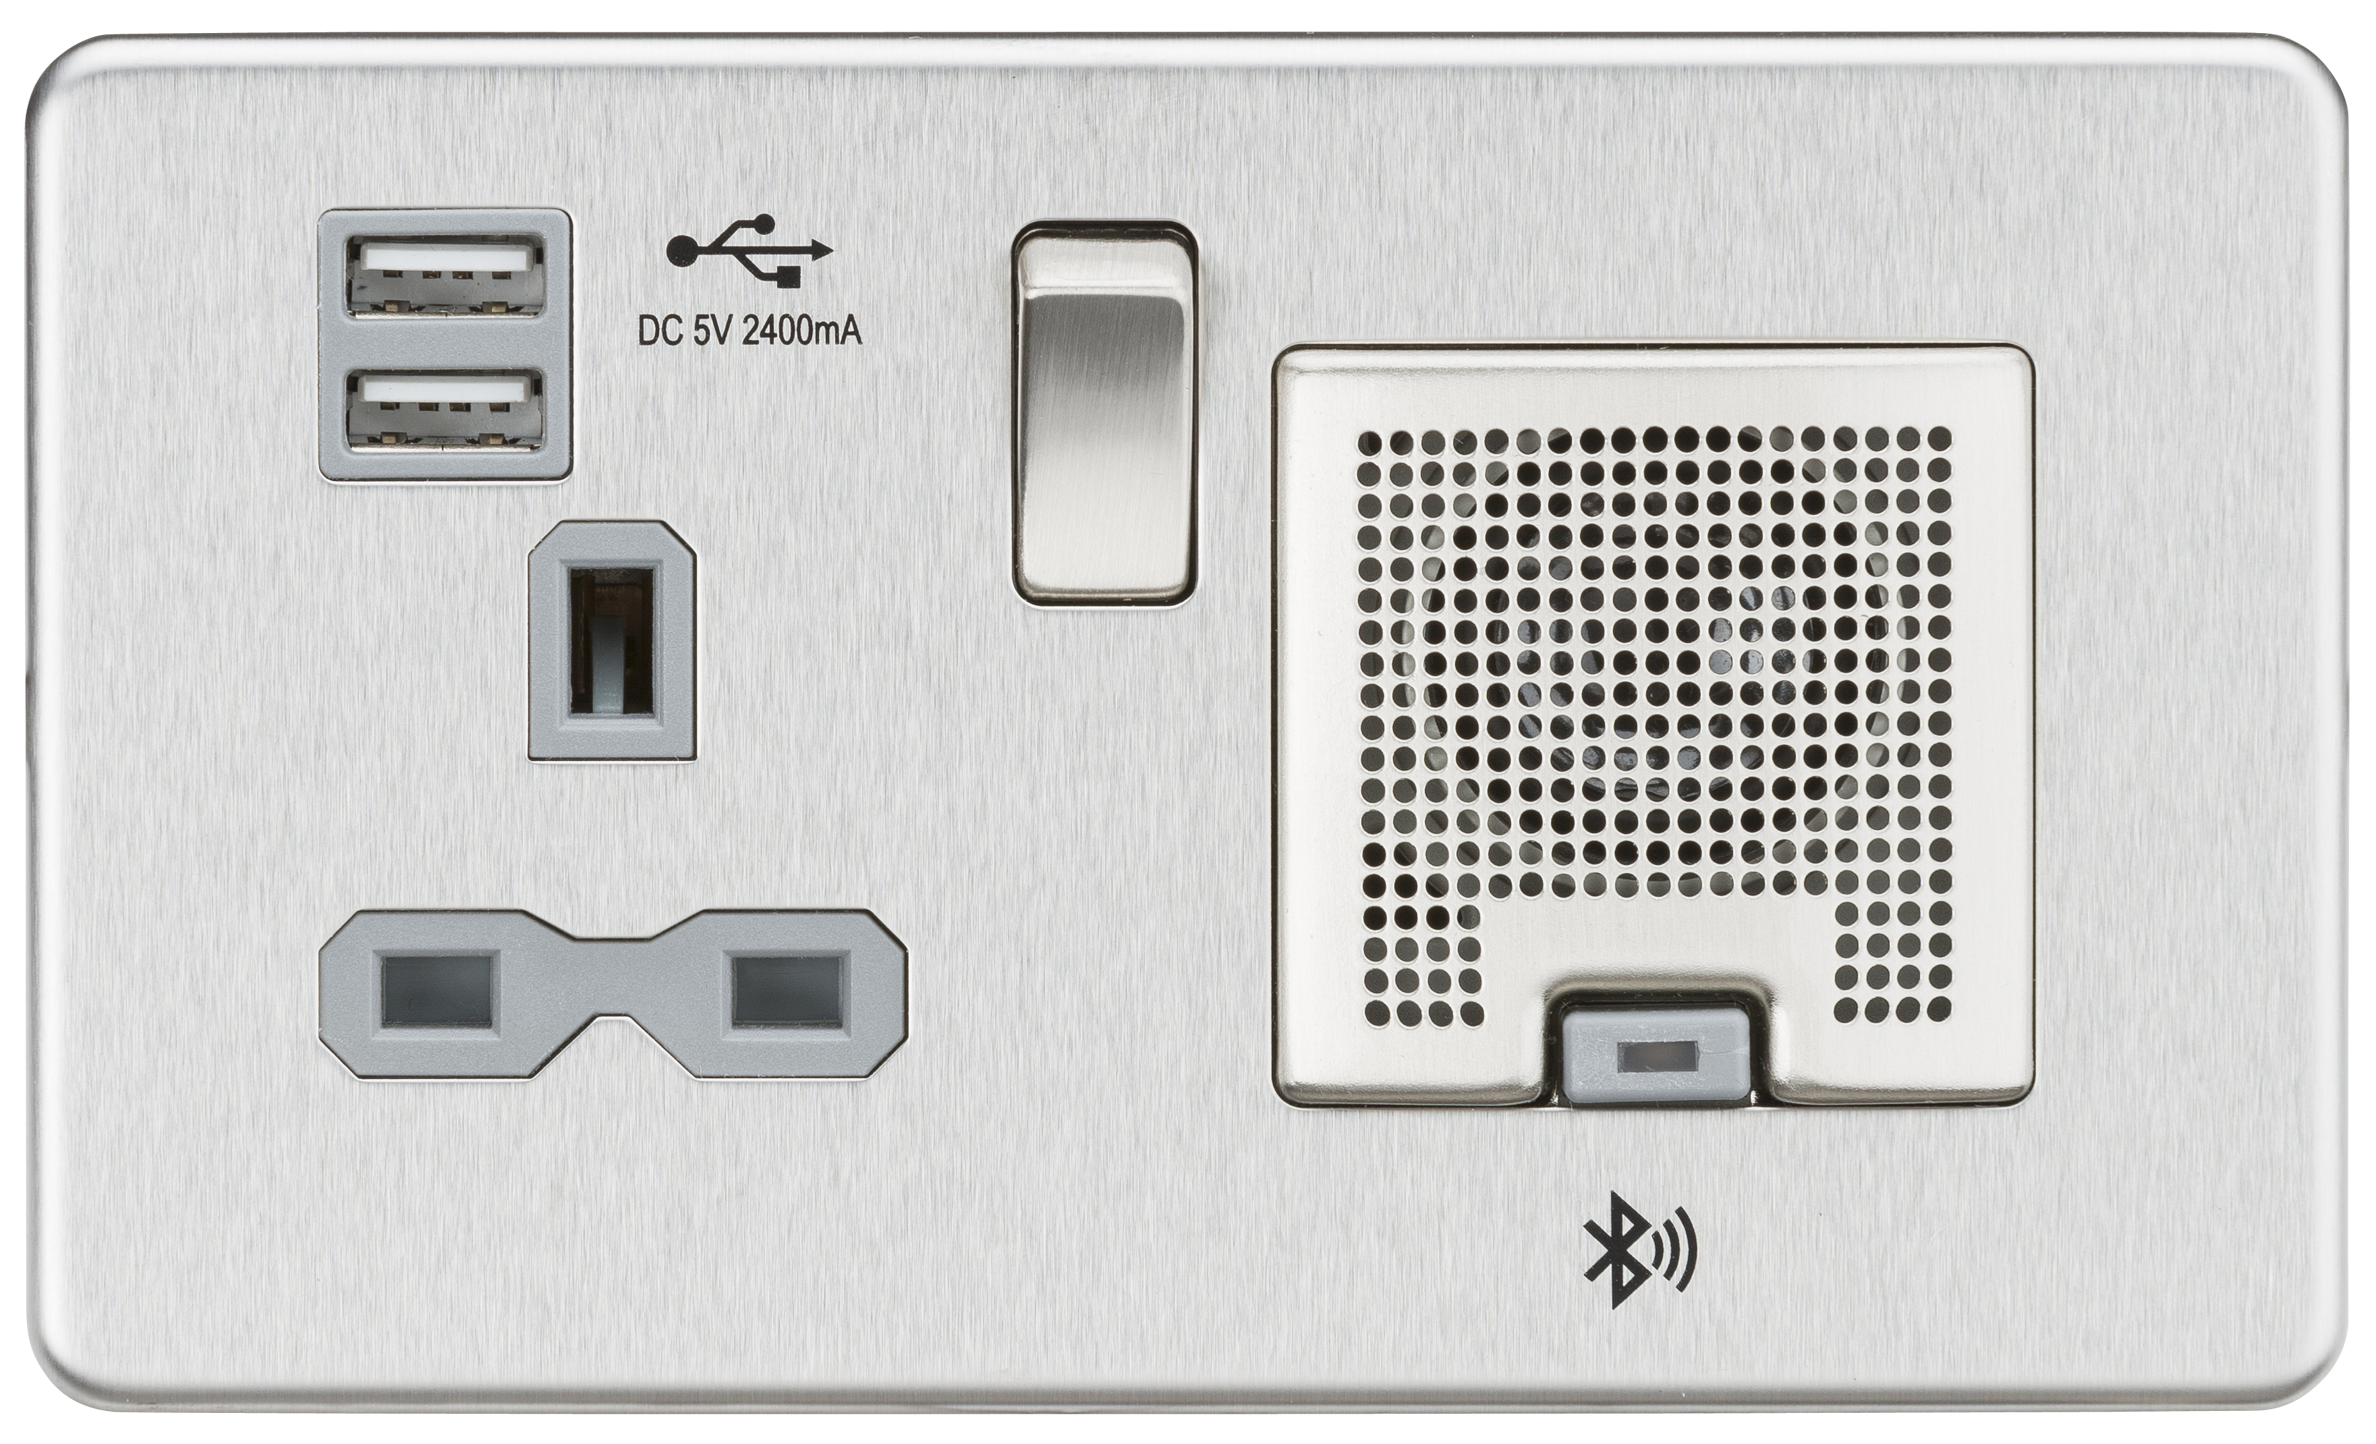 Screwless 13A Socket, USB Charger And Bluetooth Speaker Combo - Brushed Chrome With Grey Insert - SFR9905BCG 